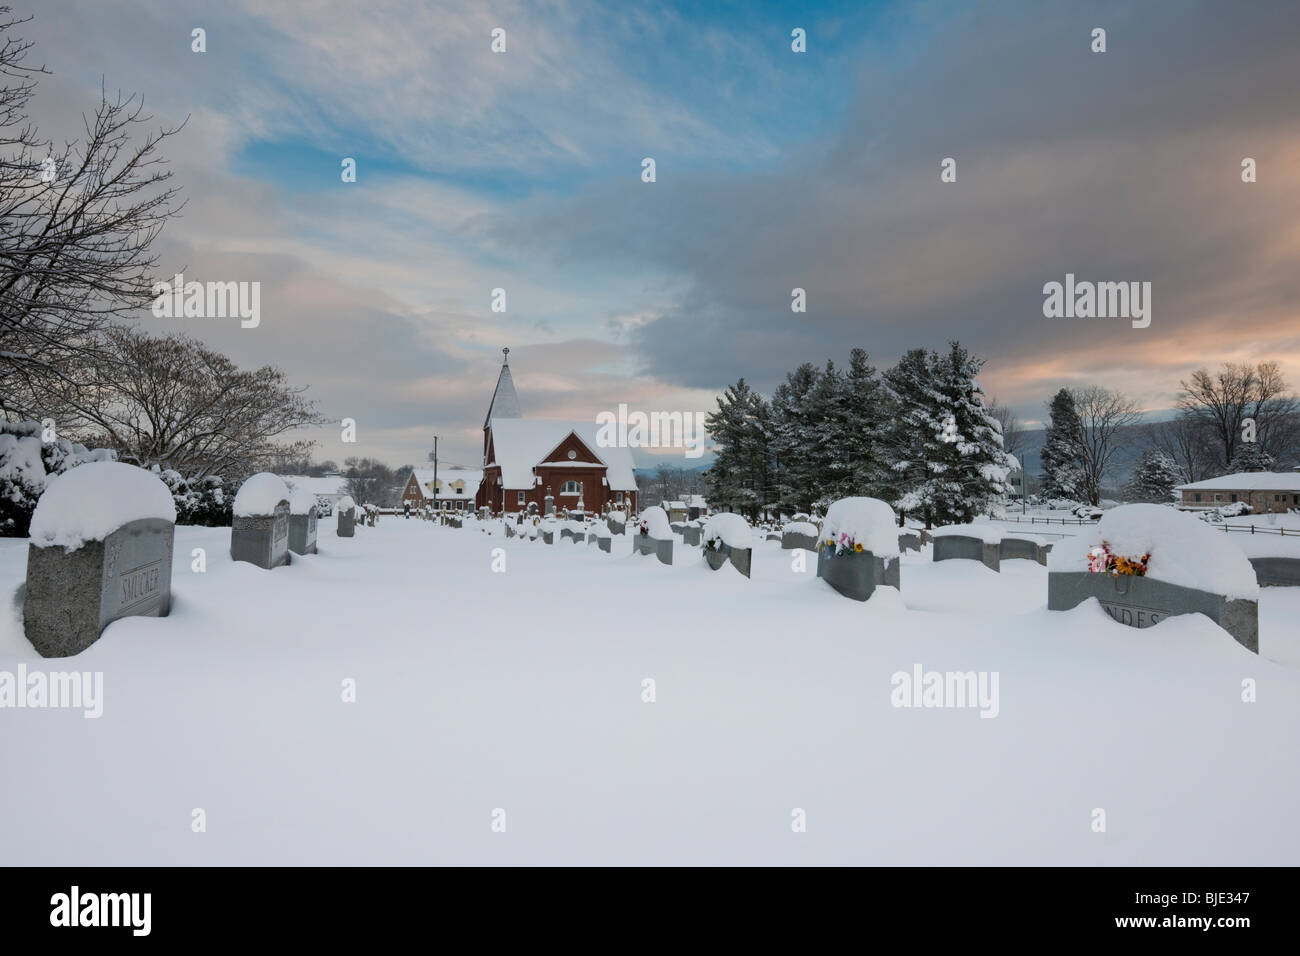 Snow covered gravestones in the Emmanuel Lutheran Church Cemetery, New Market, Virginia, USA Stock Photo